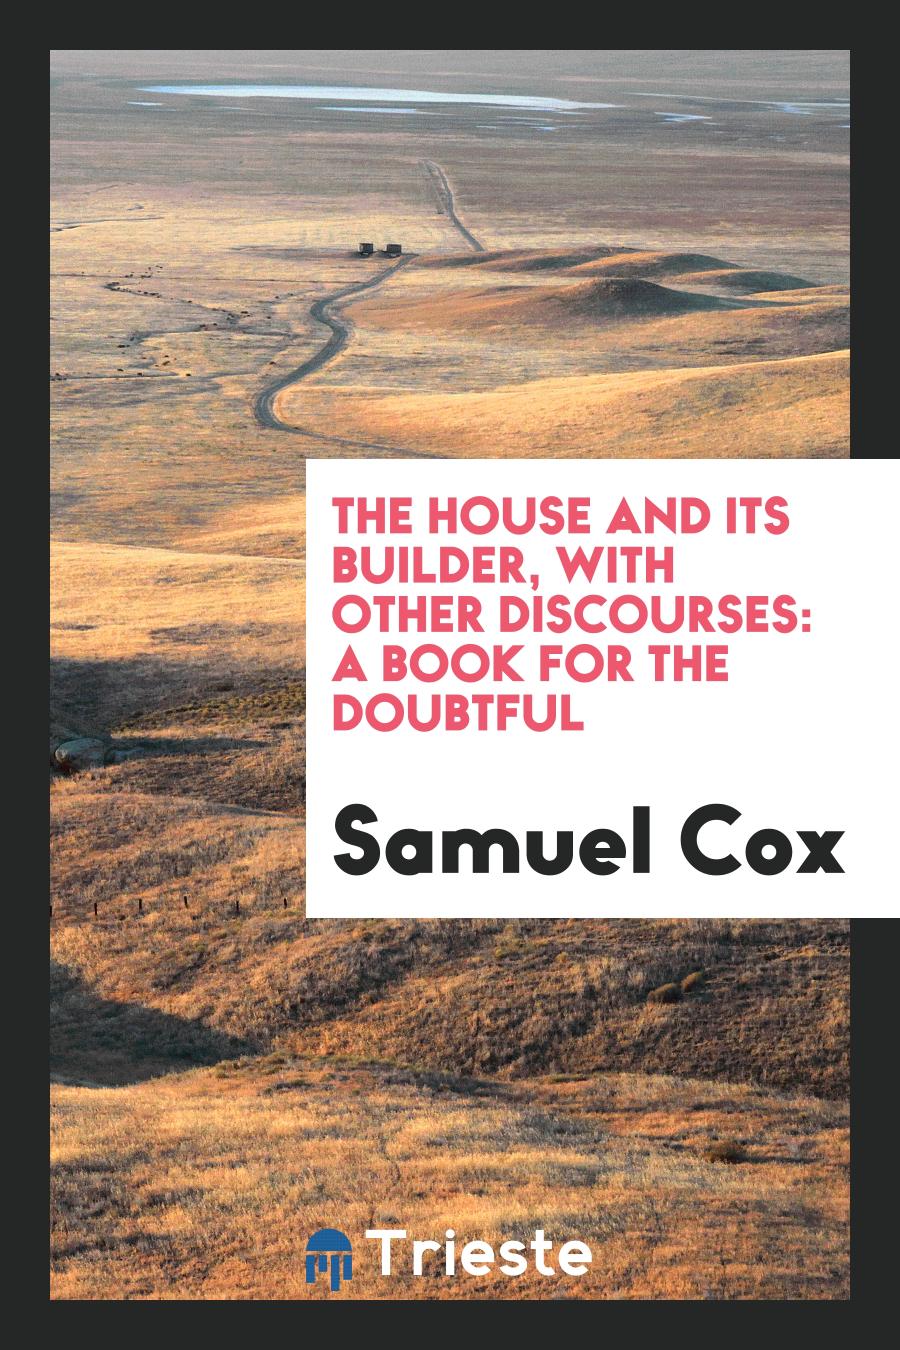 The House and Its Builder, with Other Discourses: A Book for the Doubtful